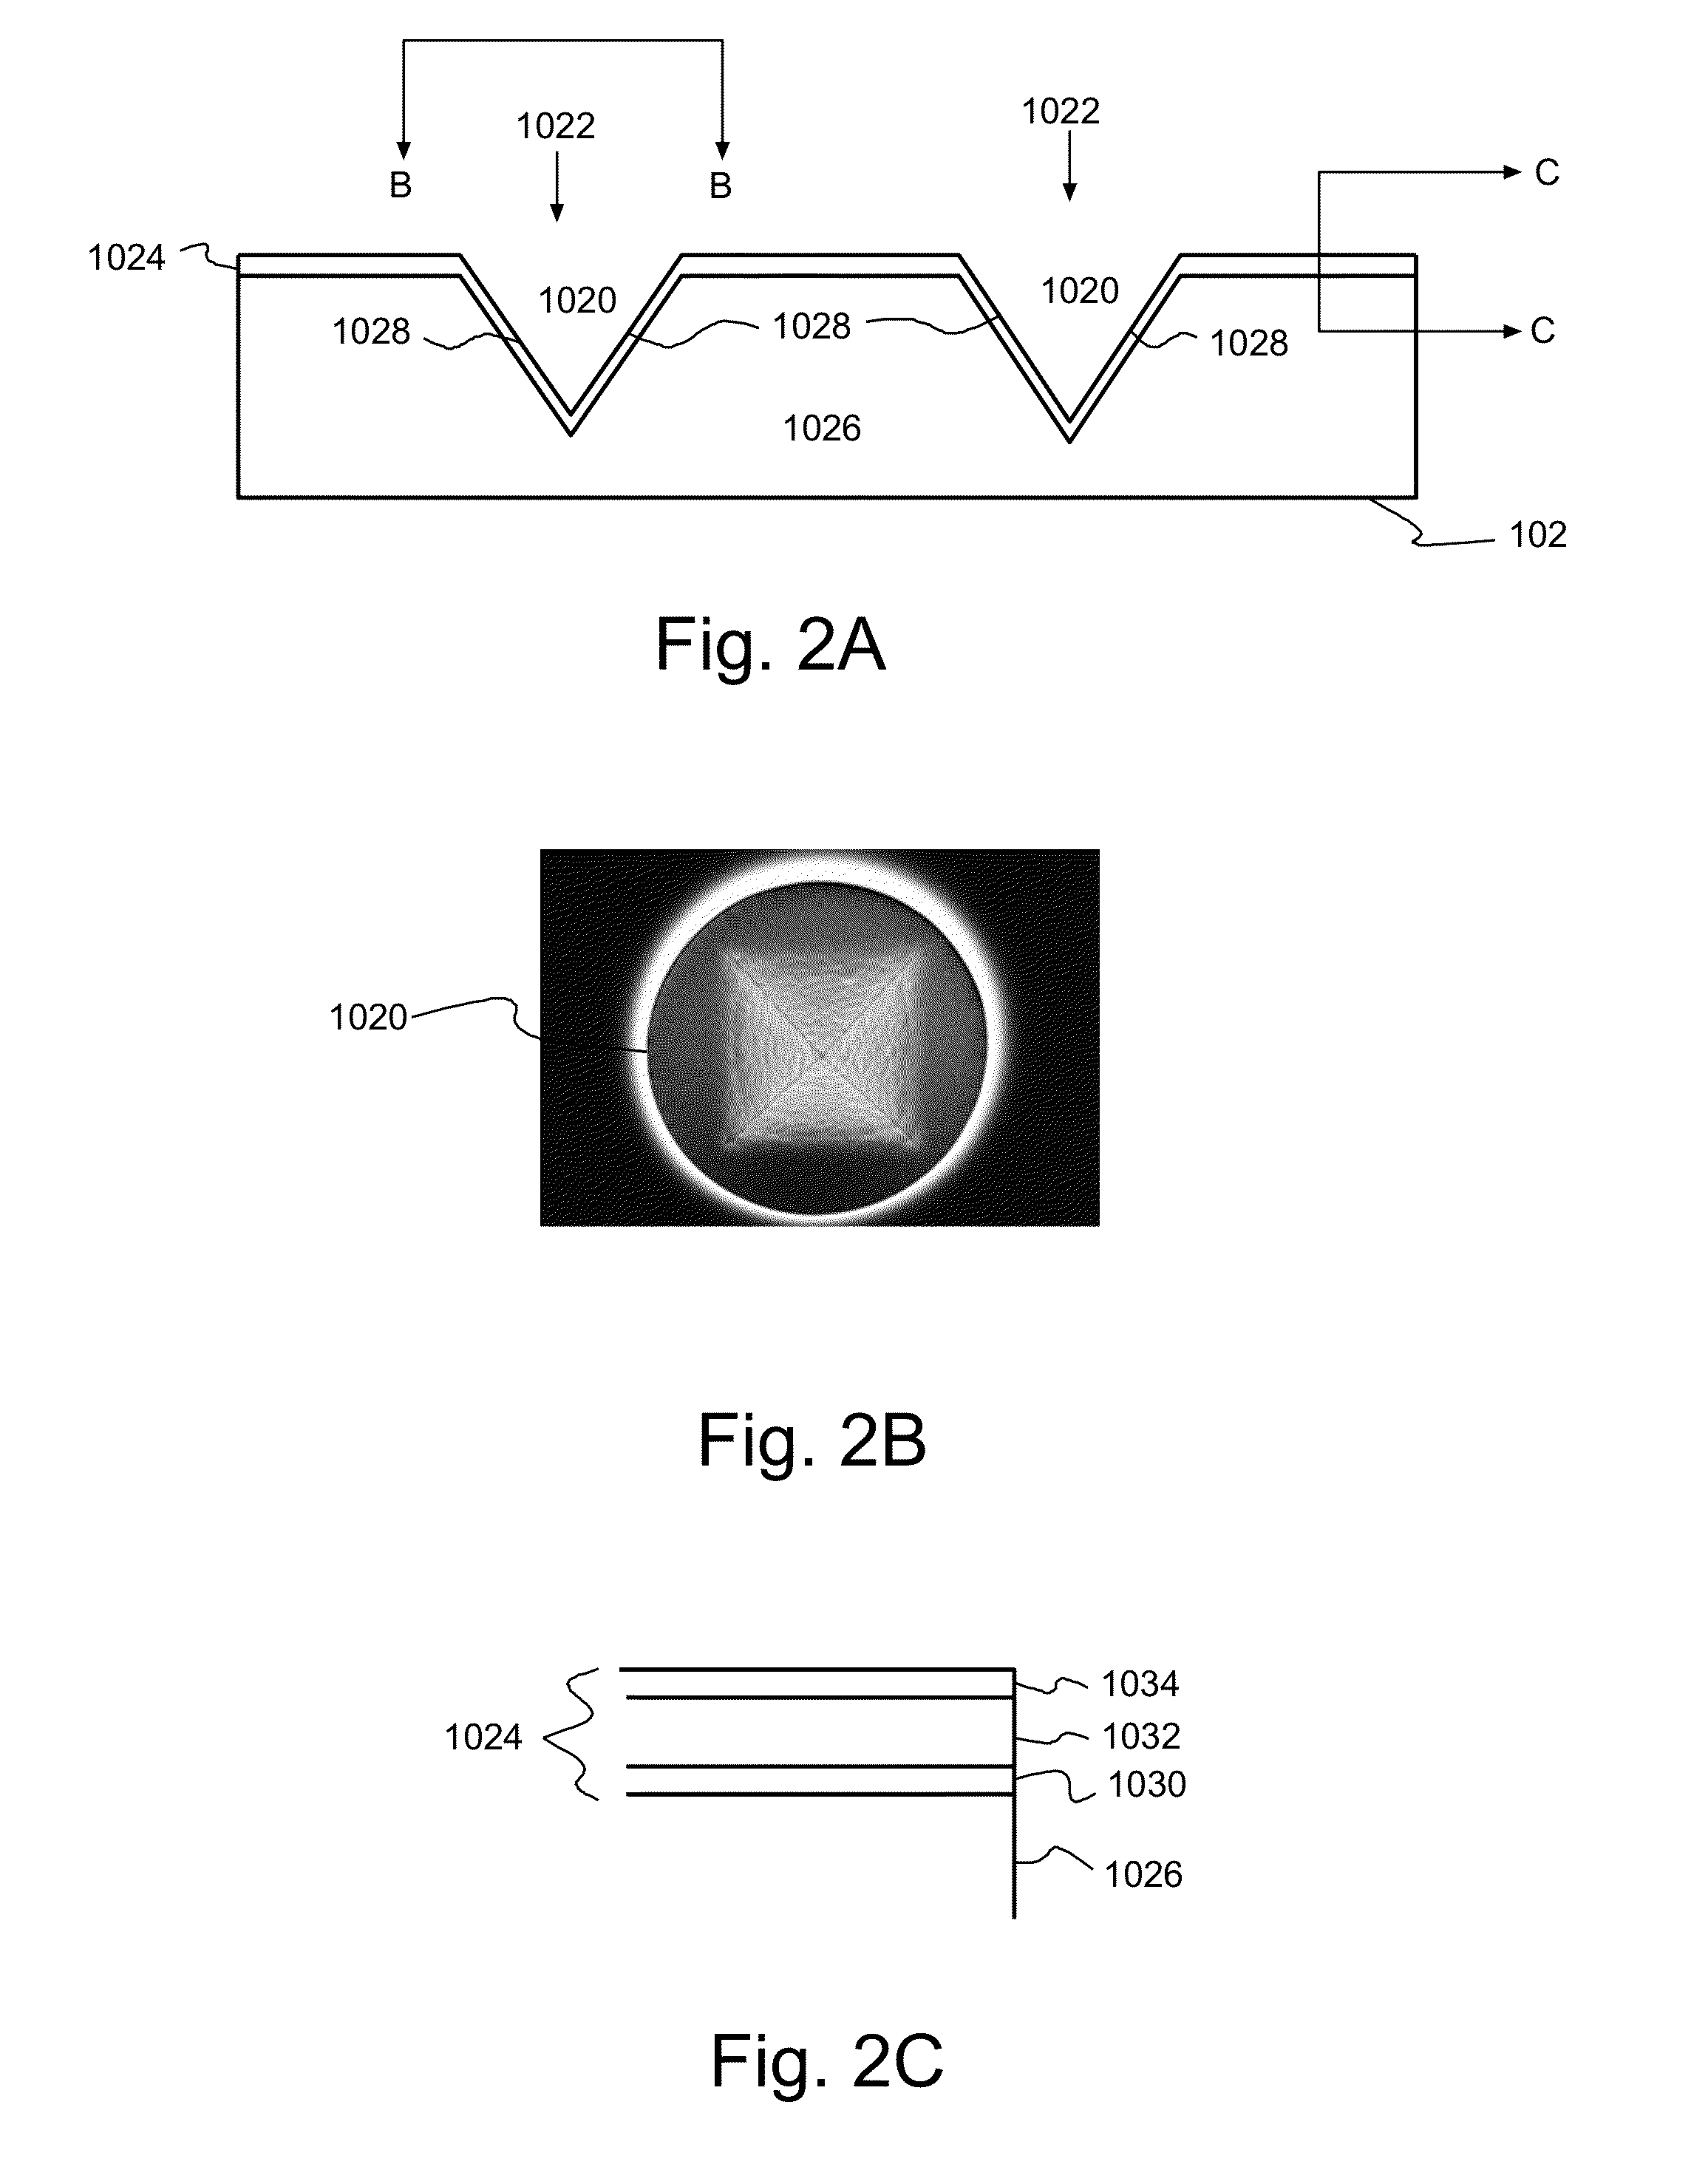 Method of forming surface protrusions on an article and the article with the protrusions attached